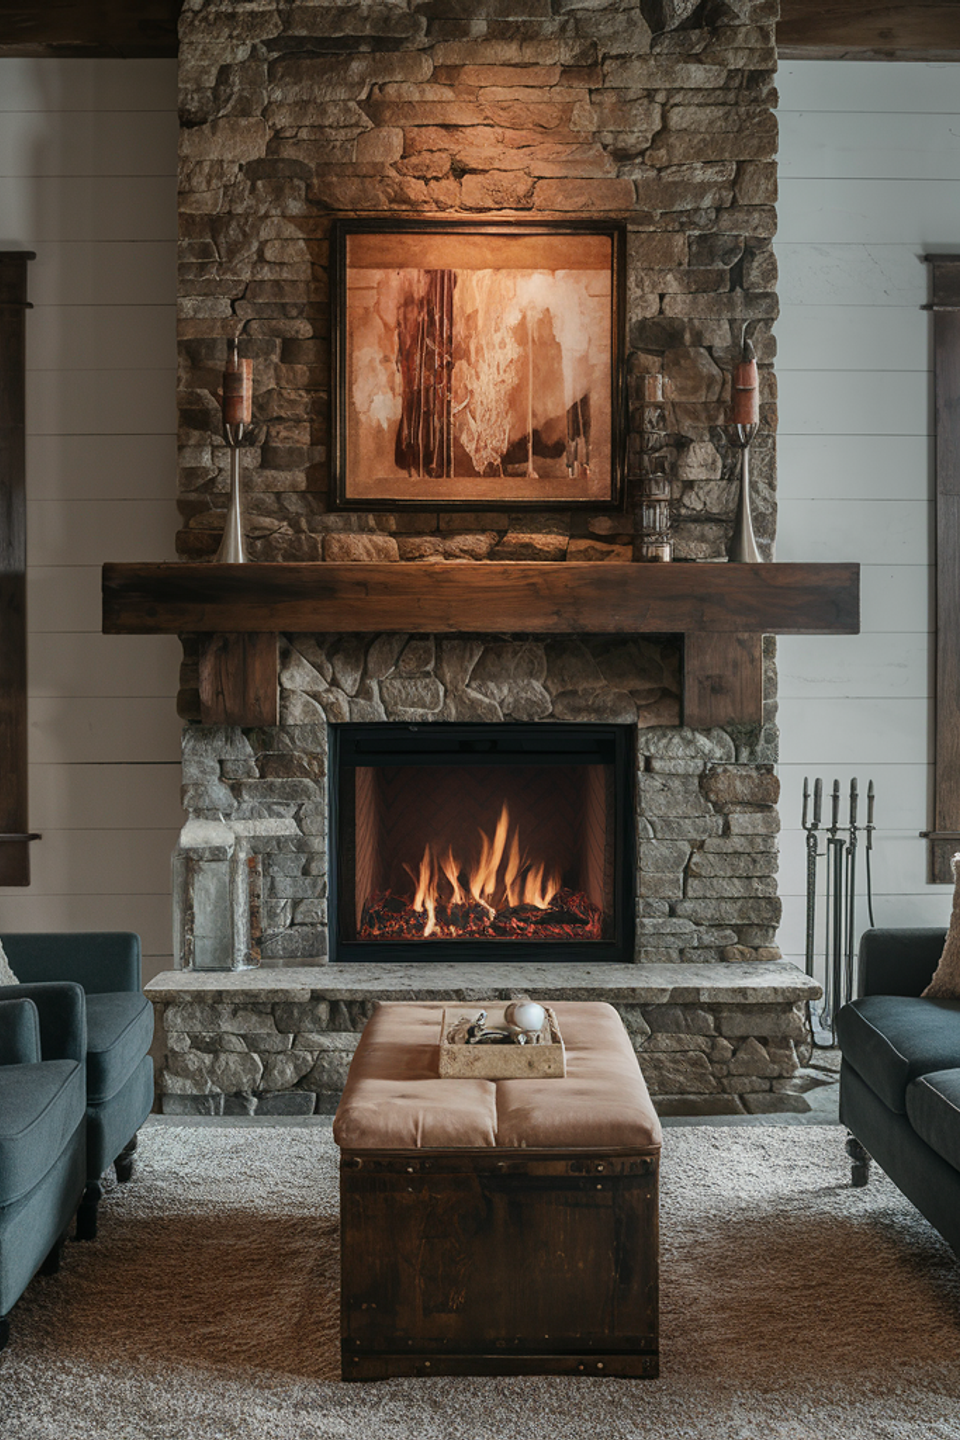 Elegant living room with rustic stone fireplace and wooden mantel, surrounded by plush sofas and a leather ottoman, offering a cozy and stylish interior